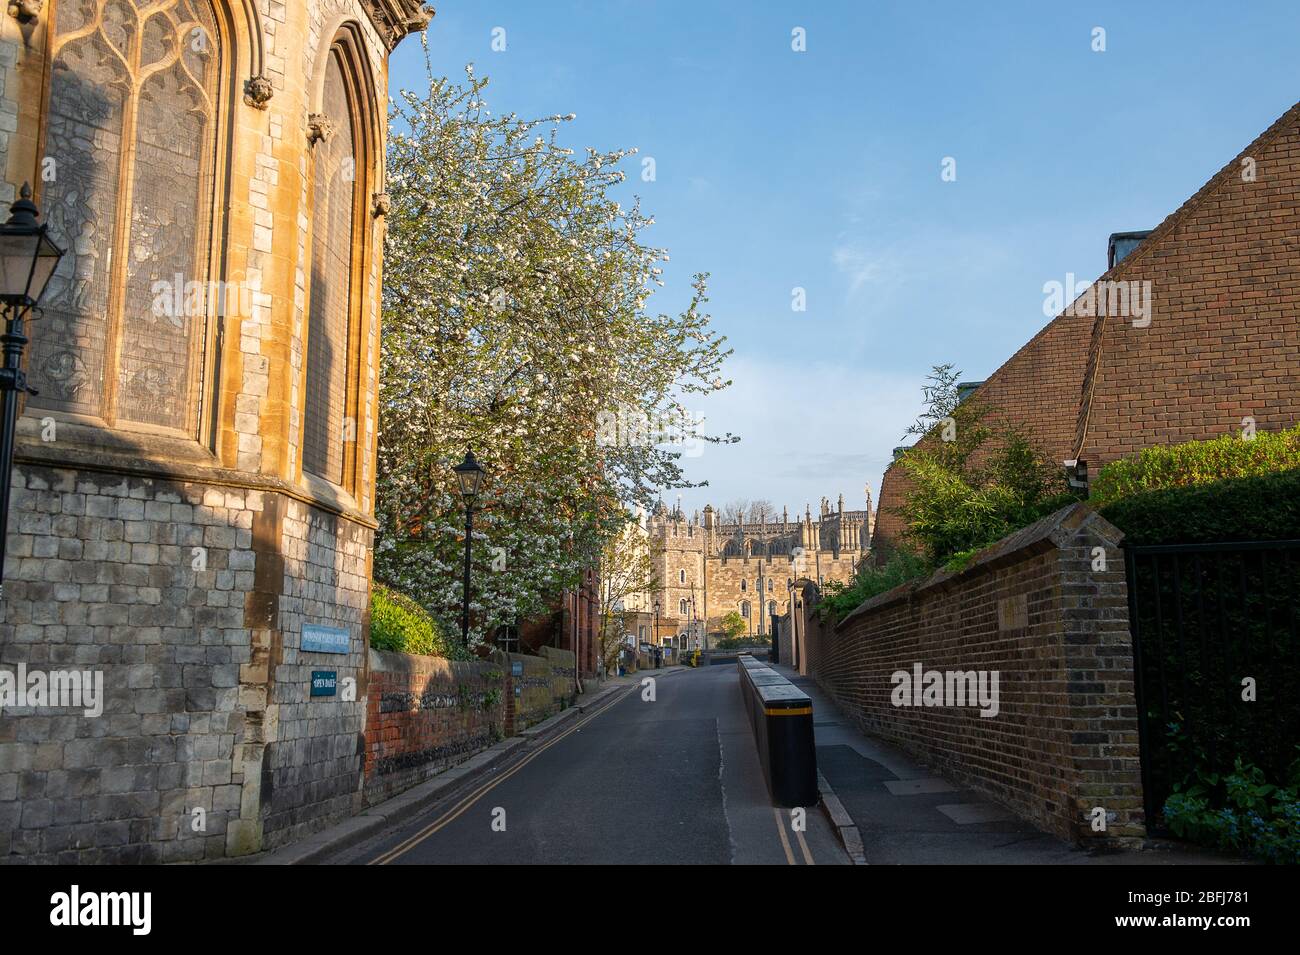 Windsor, Berkshire, UK. 12th April 2020. St Albans Street in Windsor next to Windsor Castle is deserted this bank holiday weekend as people heed Government advice to stay at home following the Coronavirus Pandemic in the UK. Credit: Maureen McLean/Alamy Stock Photo